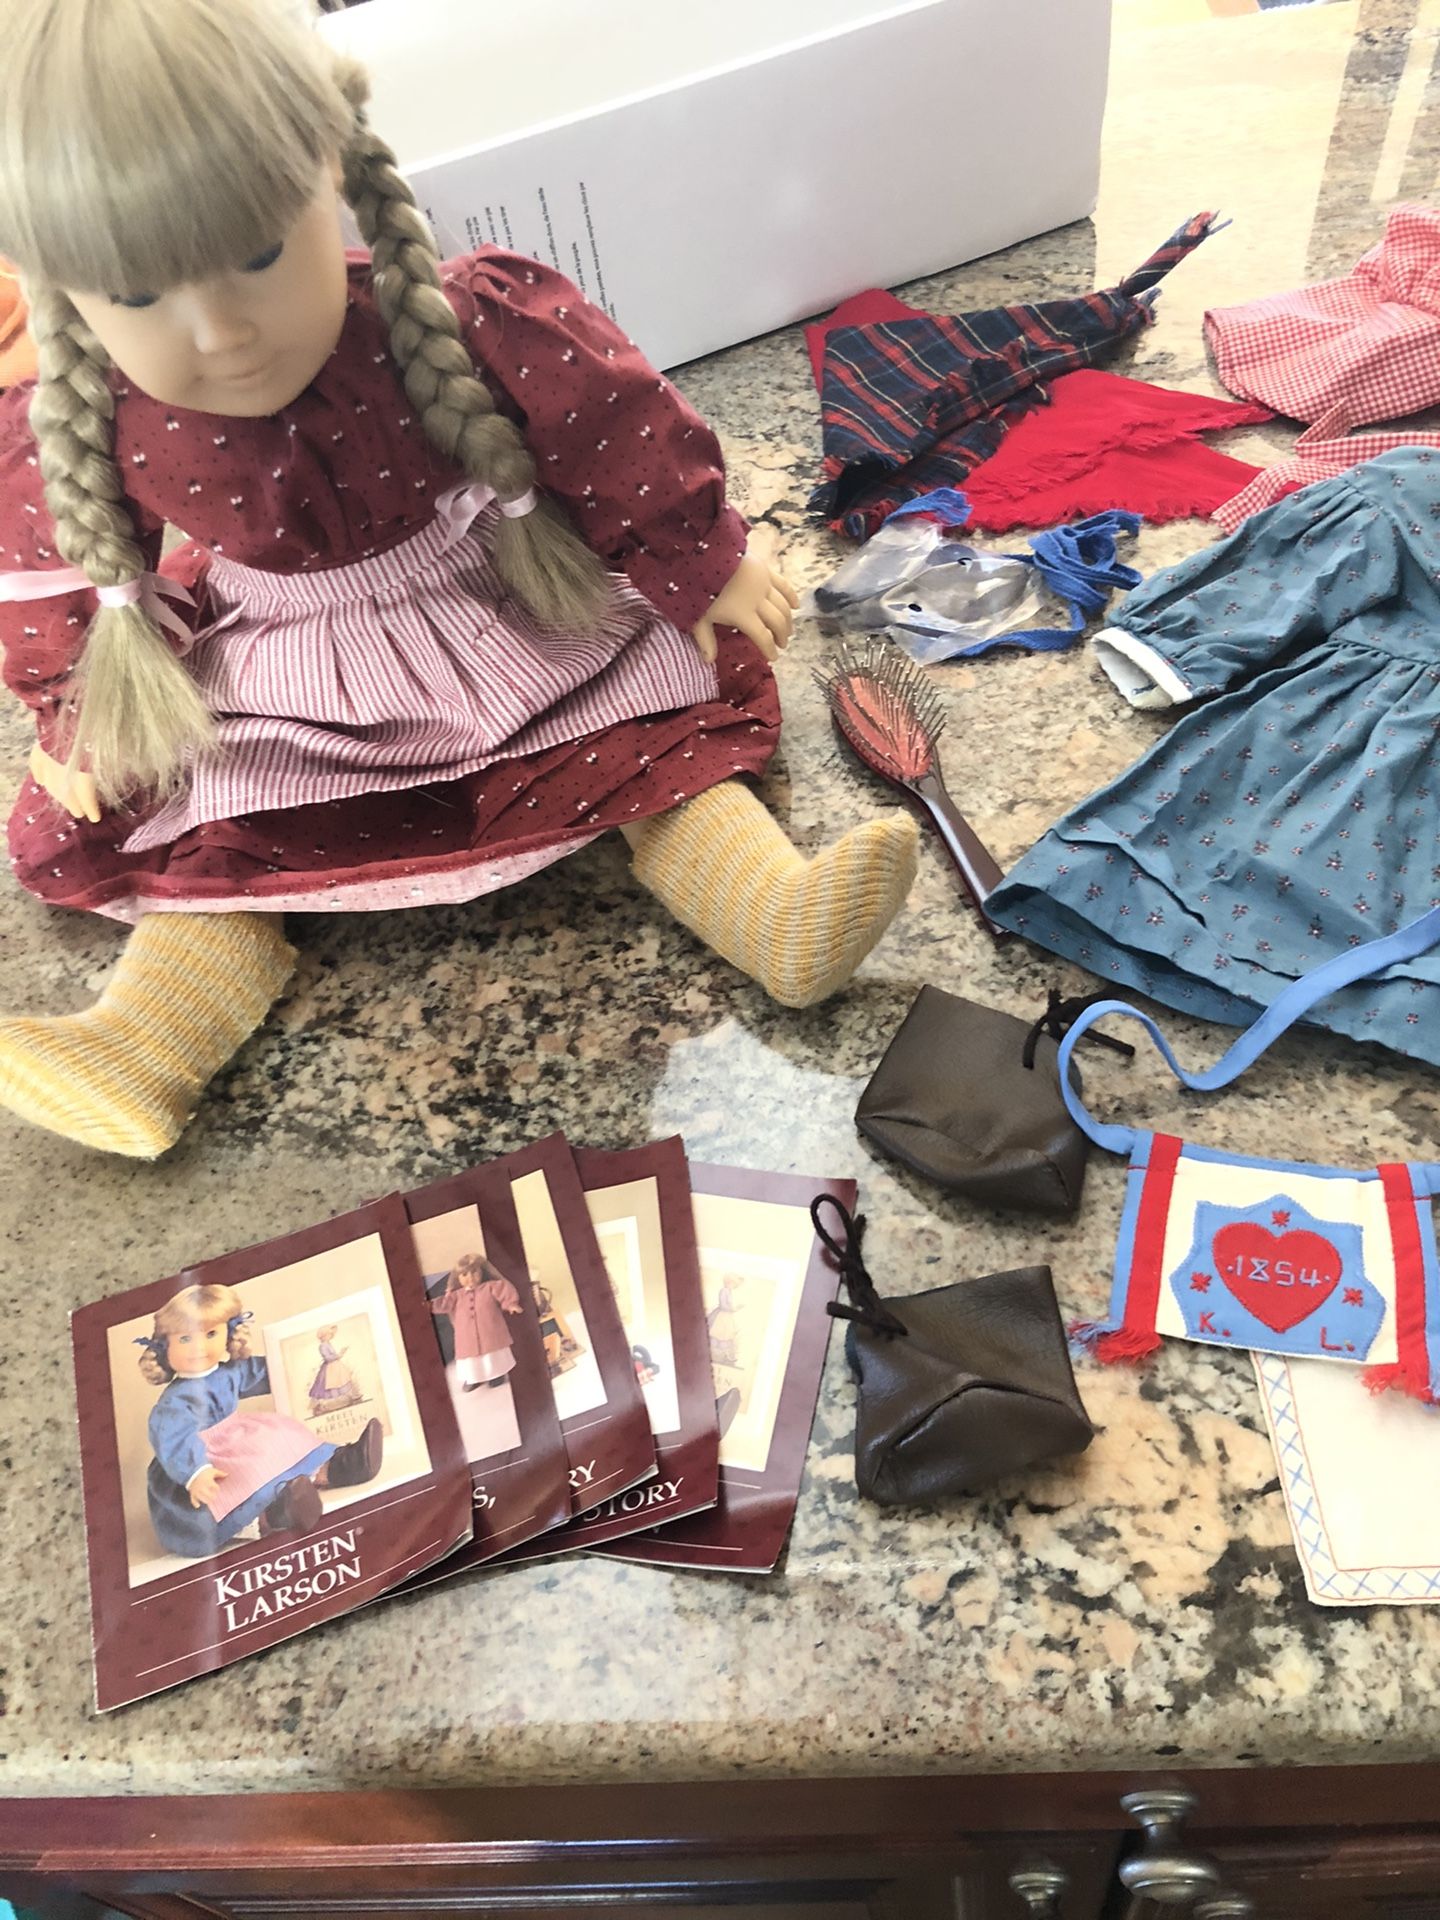 Kirsten Larson retired American girl doll with extras